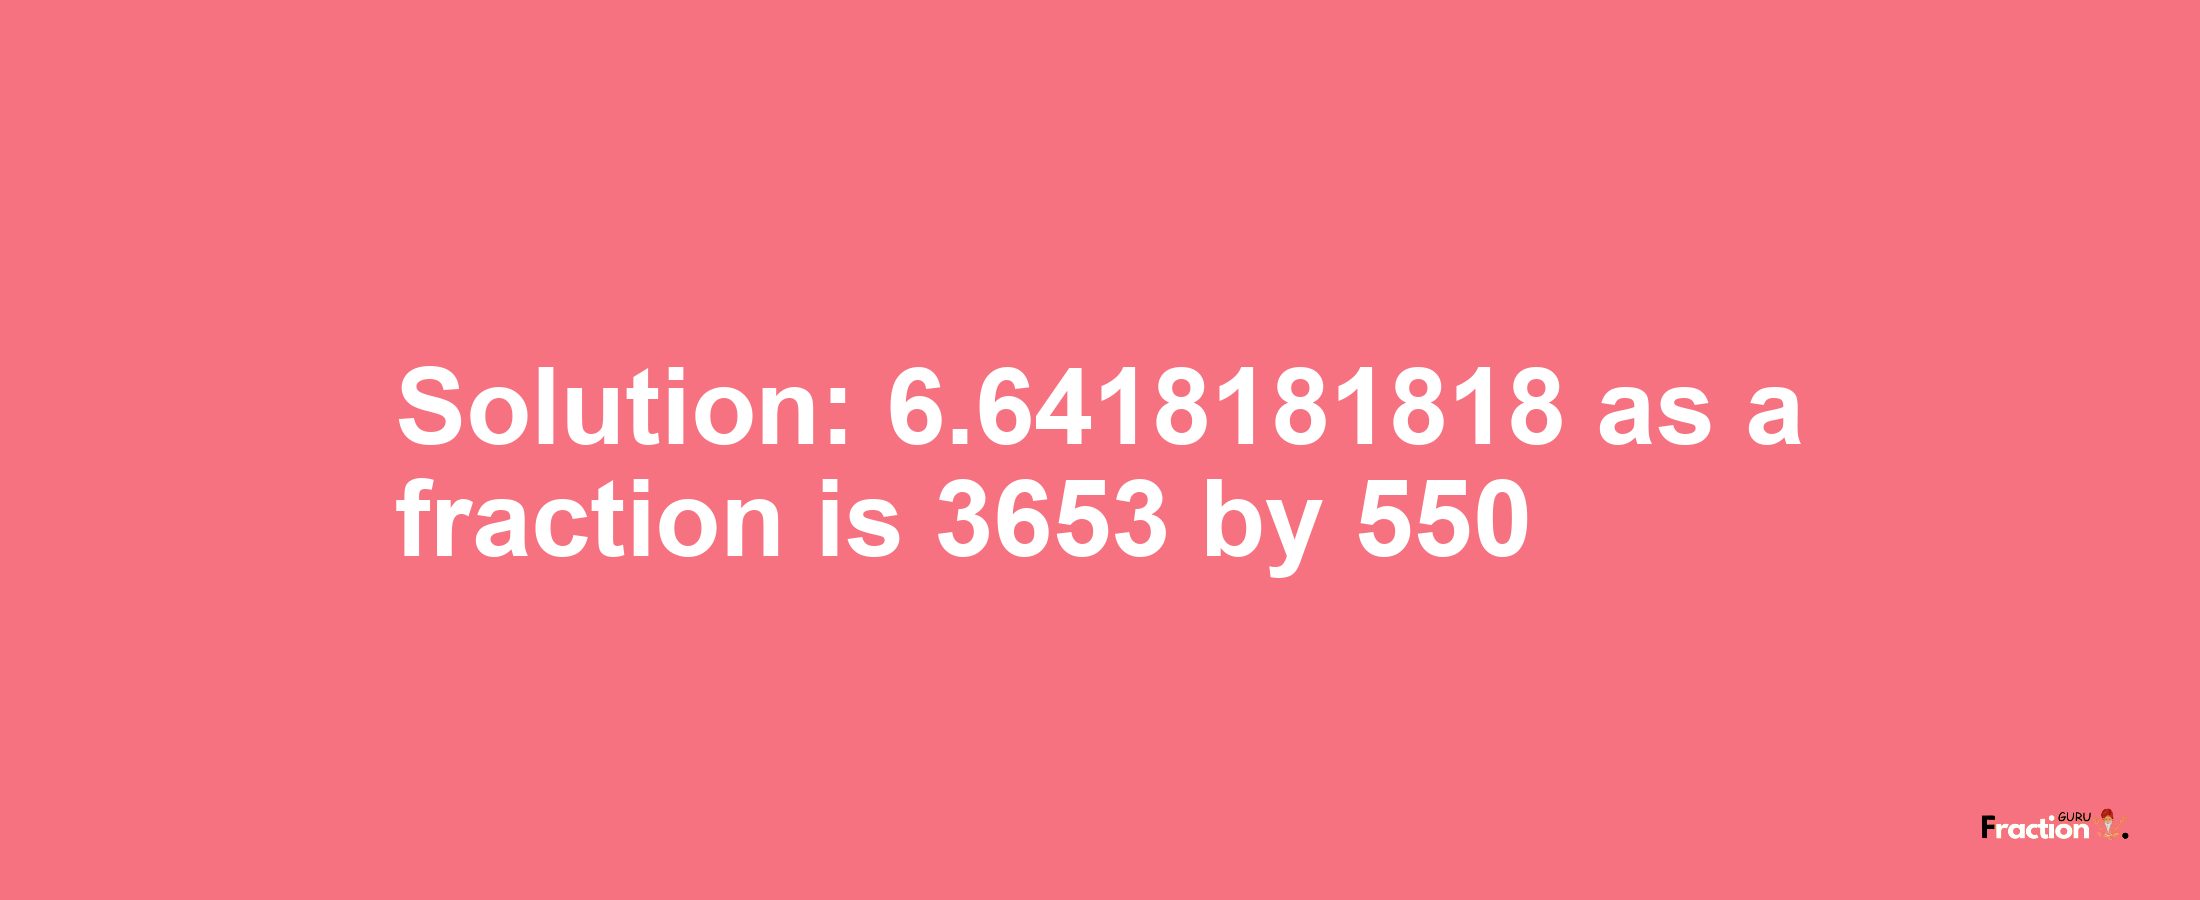 Solution:6.6418181818 as a fraction is 3653/550